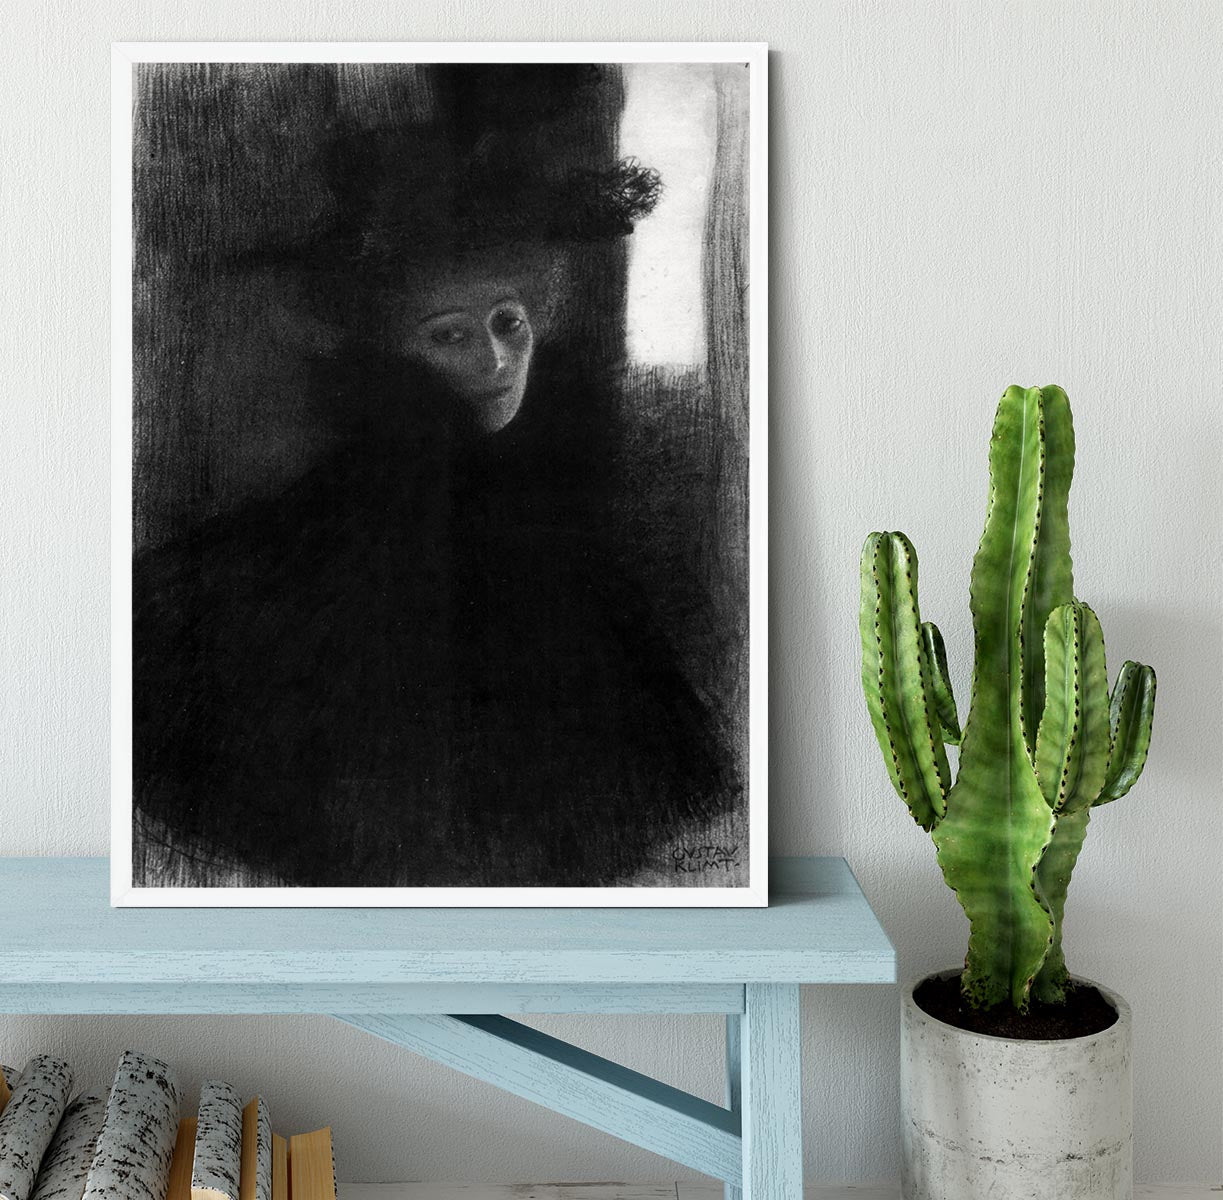 Lady with a hat and Cape by Klimt Framed Print - Canvas Art Rocks -6